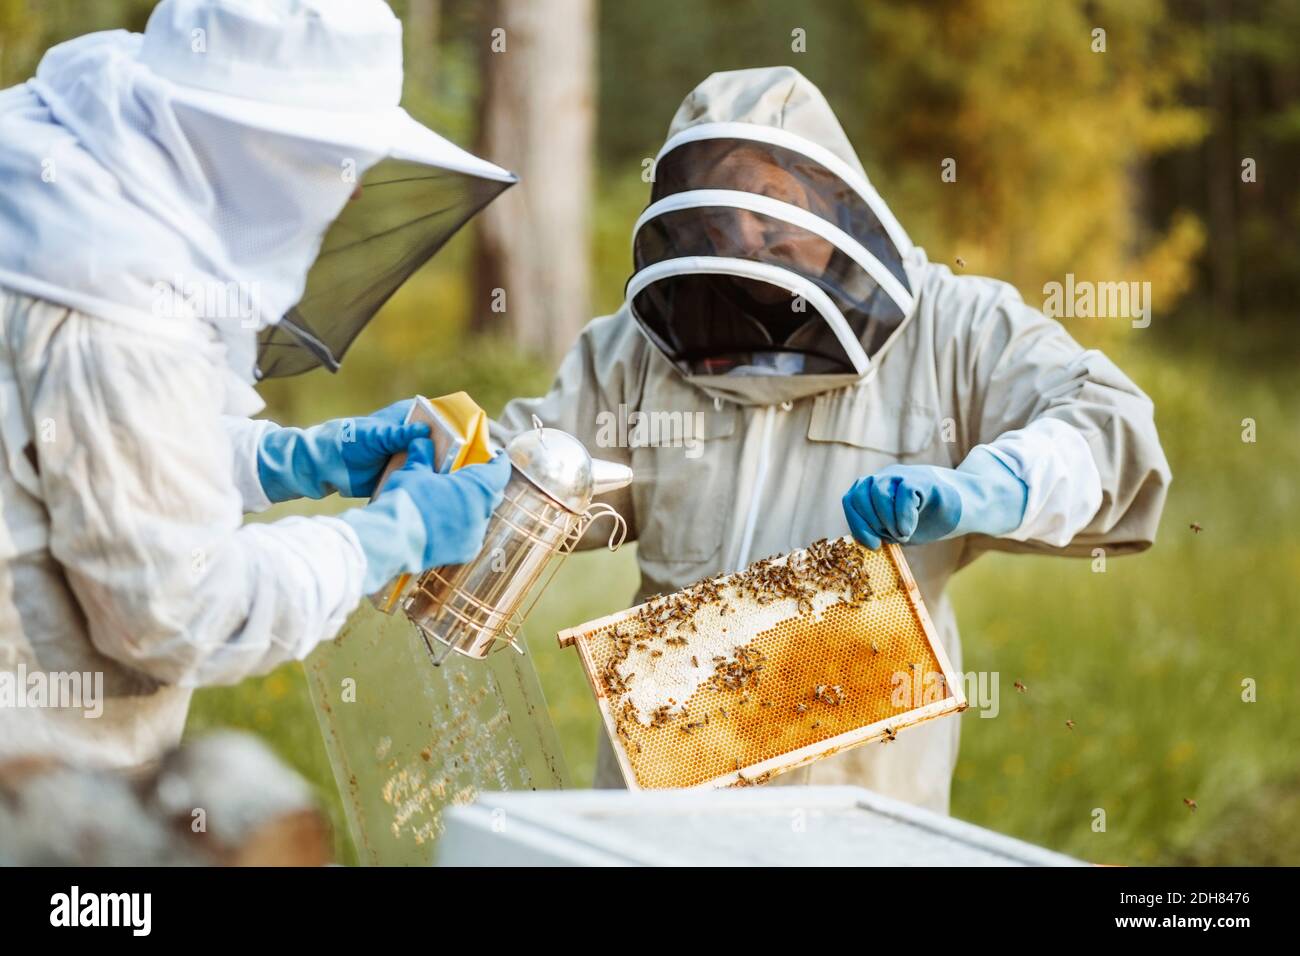 Beekeeper holding honeycomb while working with colleague on field Stock Photo